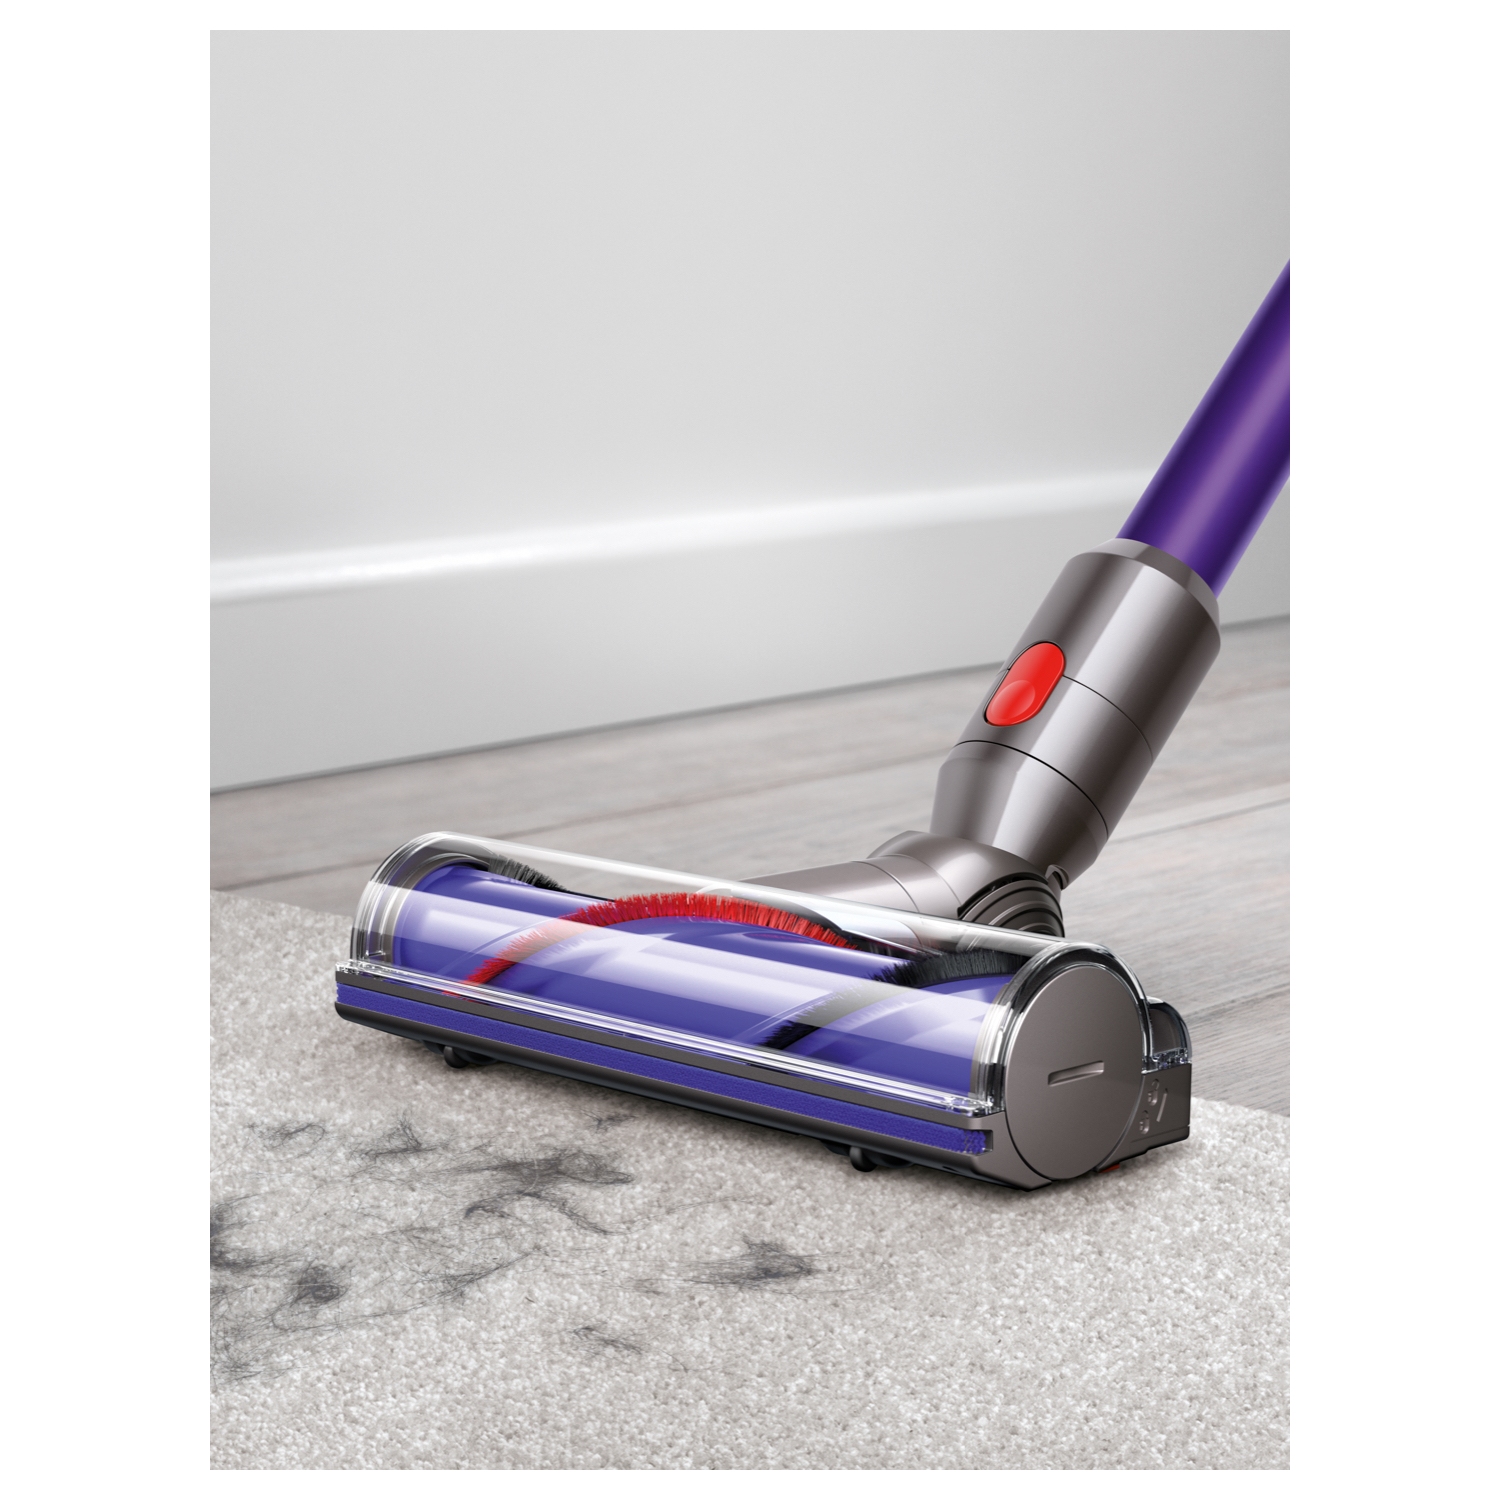 Dyson V7ANIMAL Cordless Vacuum Cleaner - 30 Minute Run Time with Complete Cleaning Kit - 5